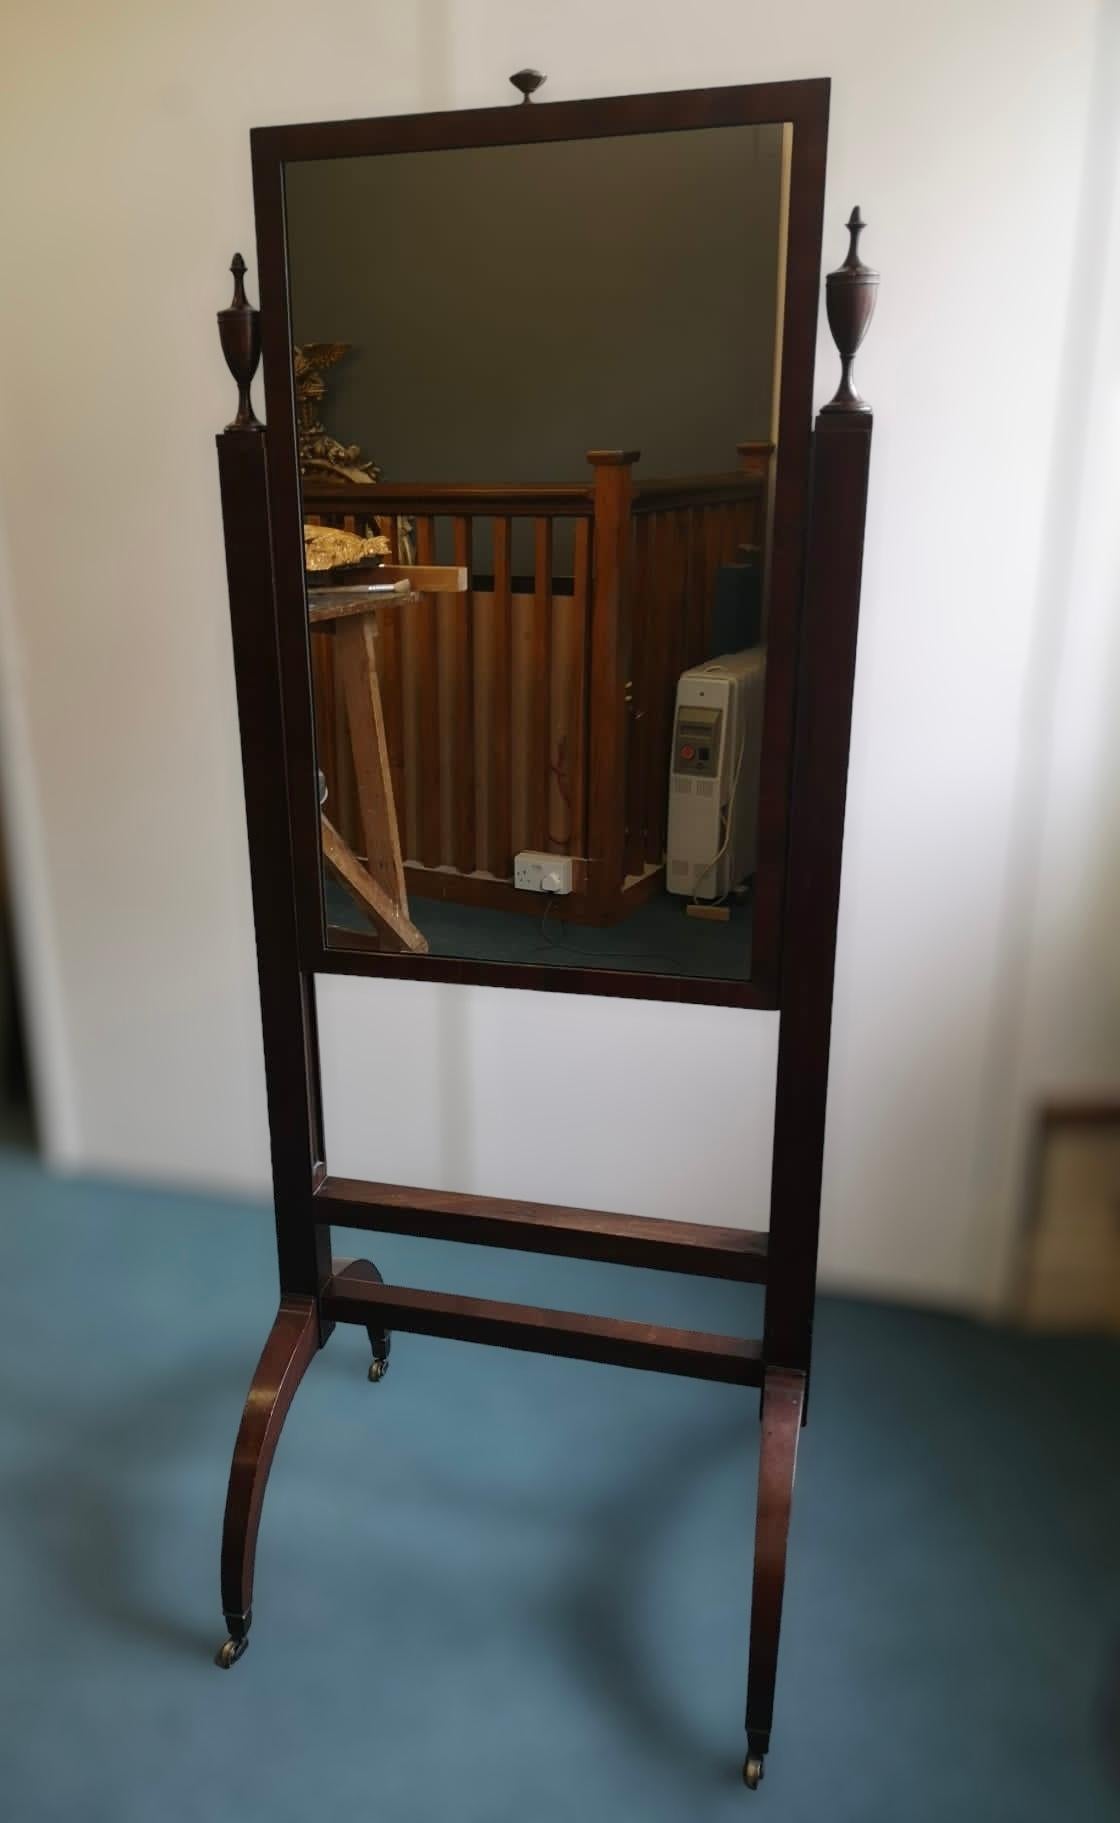 A 19th century Mahogany inlaid adjustable rectangular Cheval Mirror with turned finials and arched outswept legs on Brass castors.

Height 143cm Extended 155cm